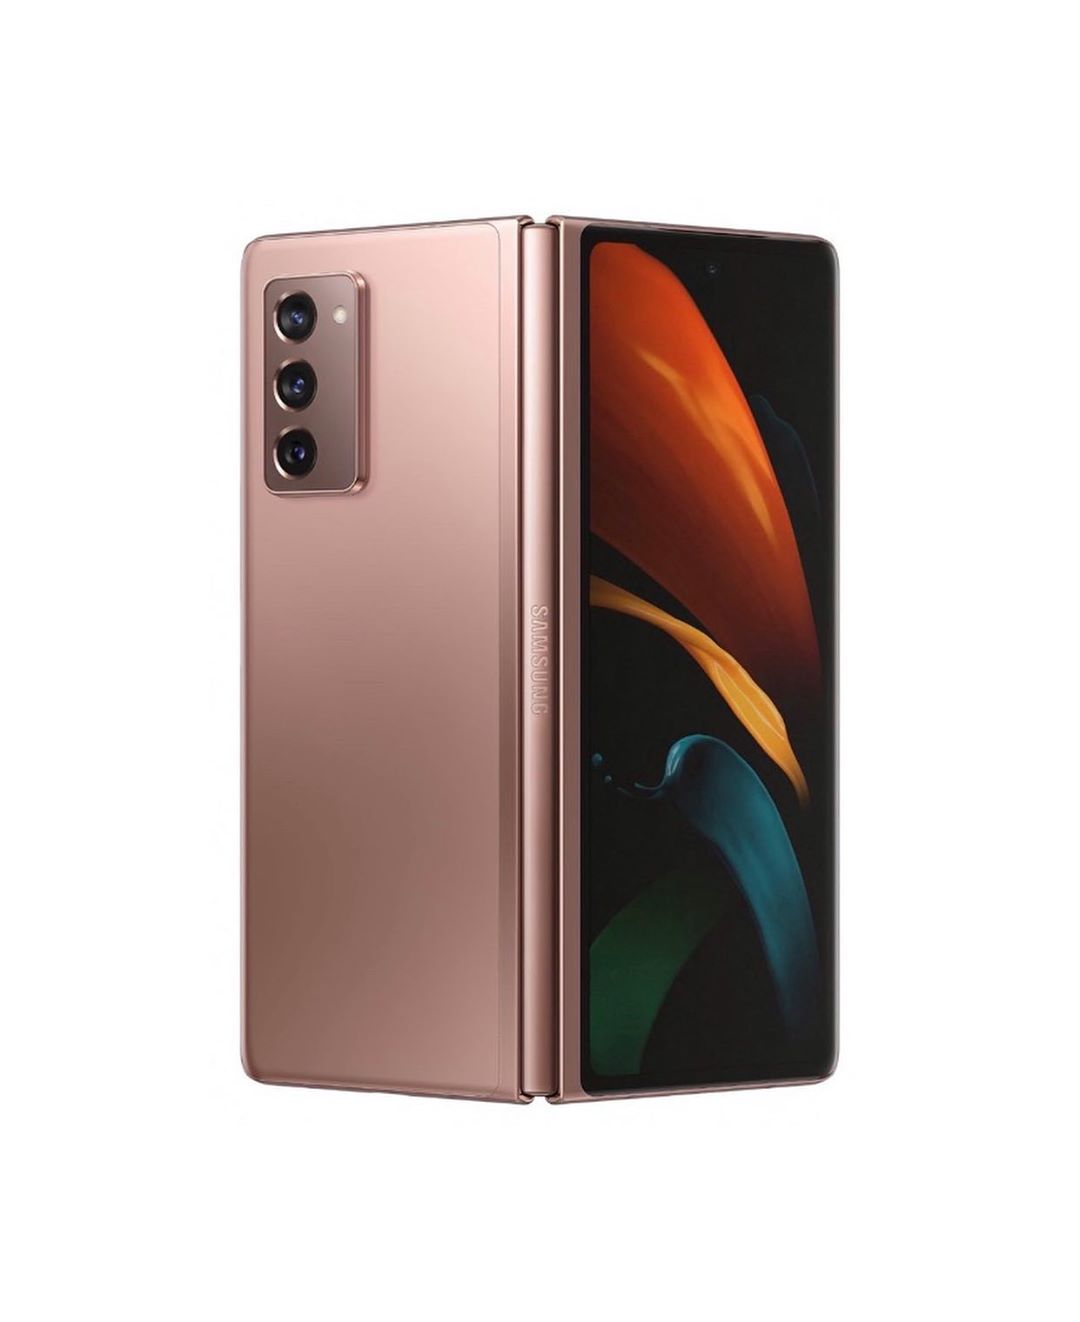 Samsung Galaxy Z Fold 2 specs and price - Specifications-Pro